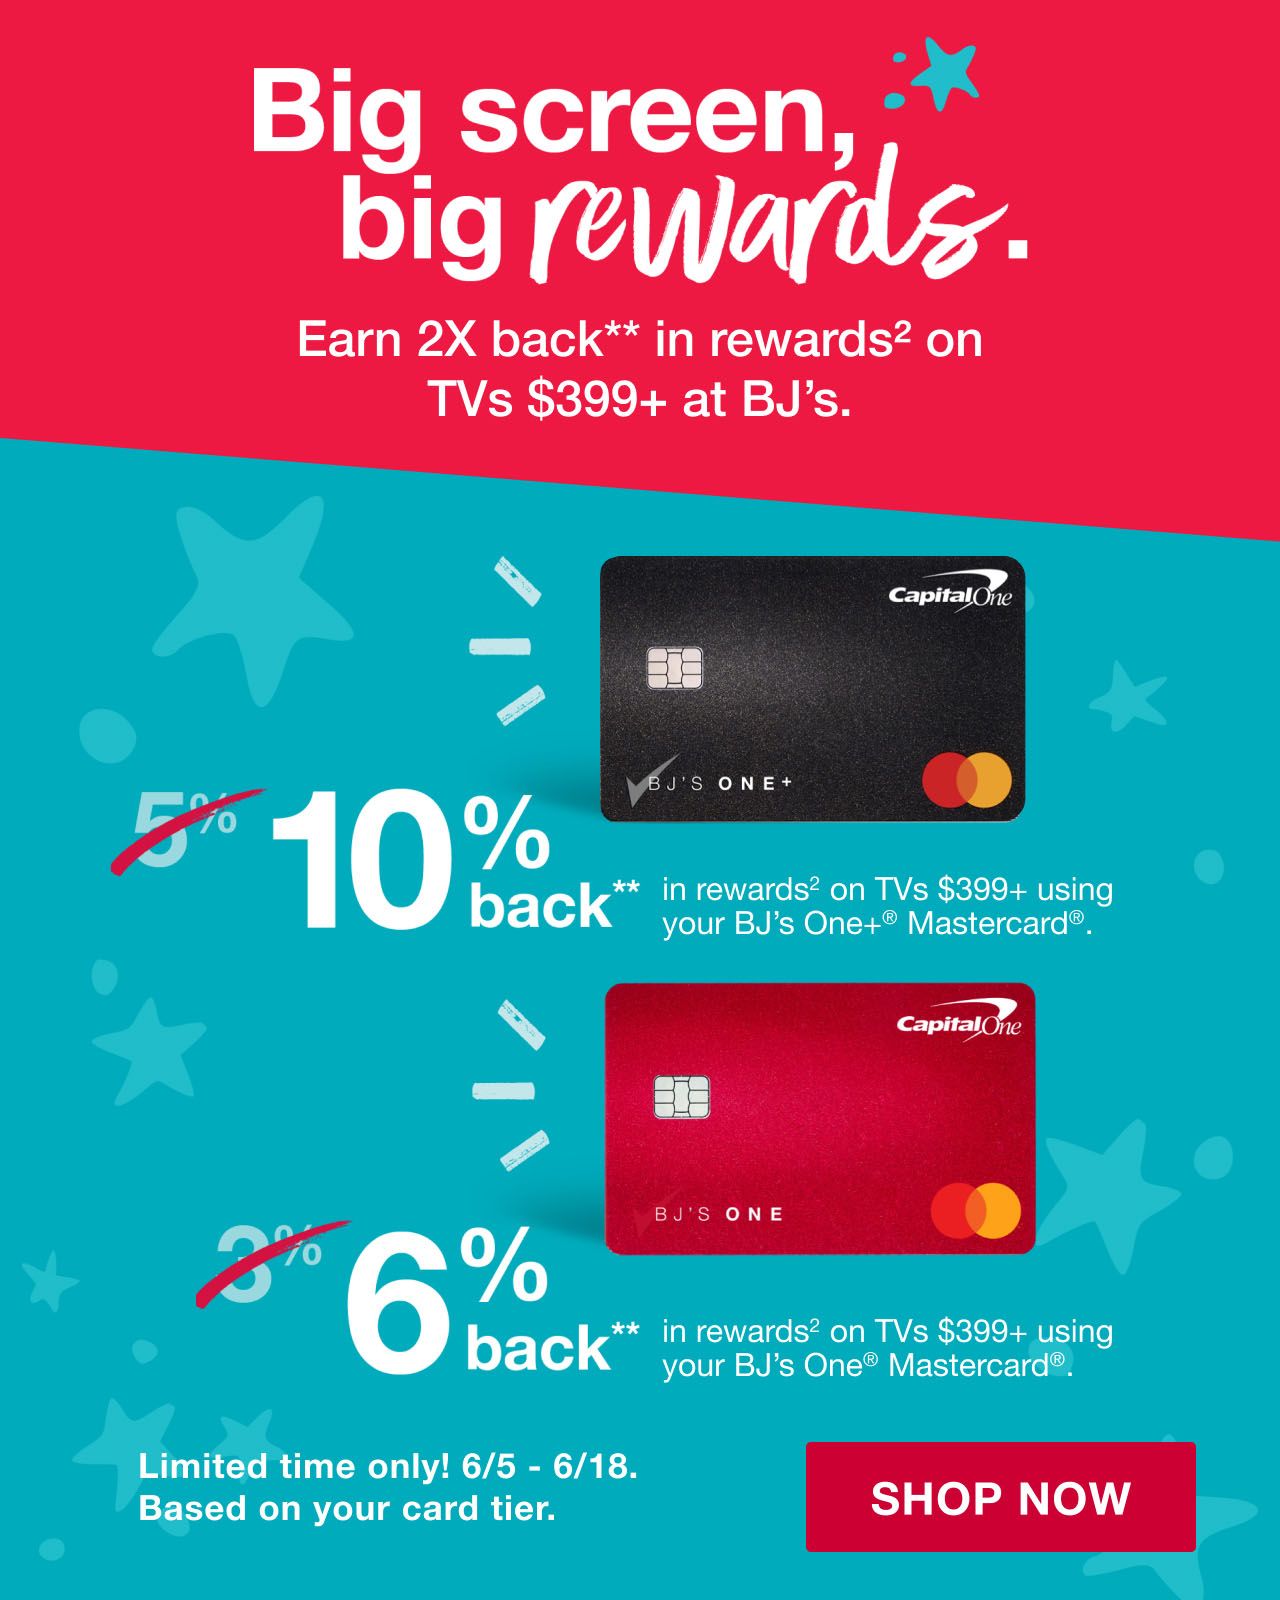 Big screen, big rewards. Earn 2x back** in rewards(2) on TVs $339+ at BJ's. Limited time only! 6/5-6/18. Based on your credit tier. Click to shop now